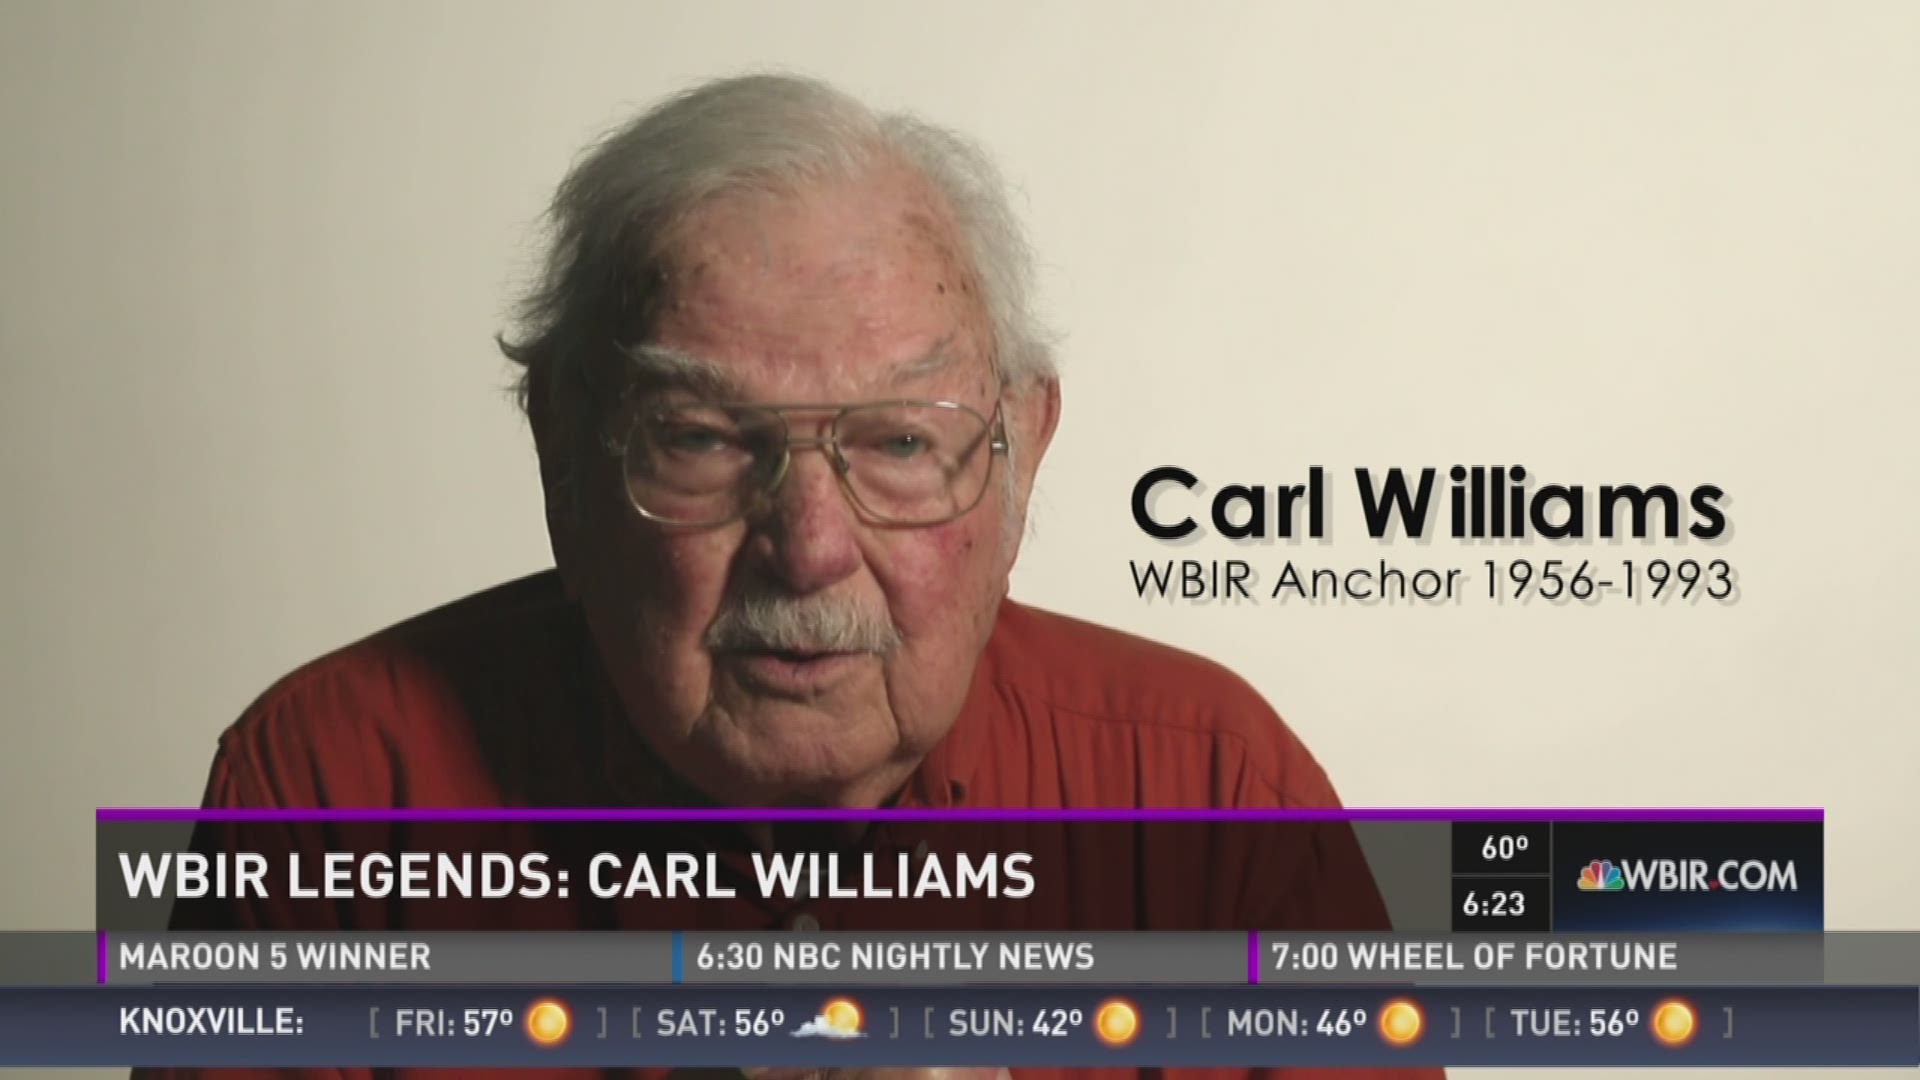 As we look back at WBIR's nearly 60 years, we're honoring those who make their mark on the station, including Carl Williams. Nov. 19, 2015